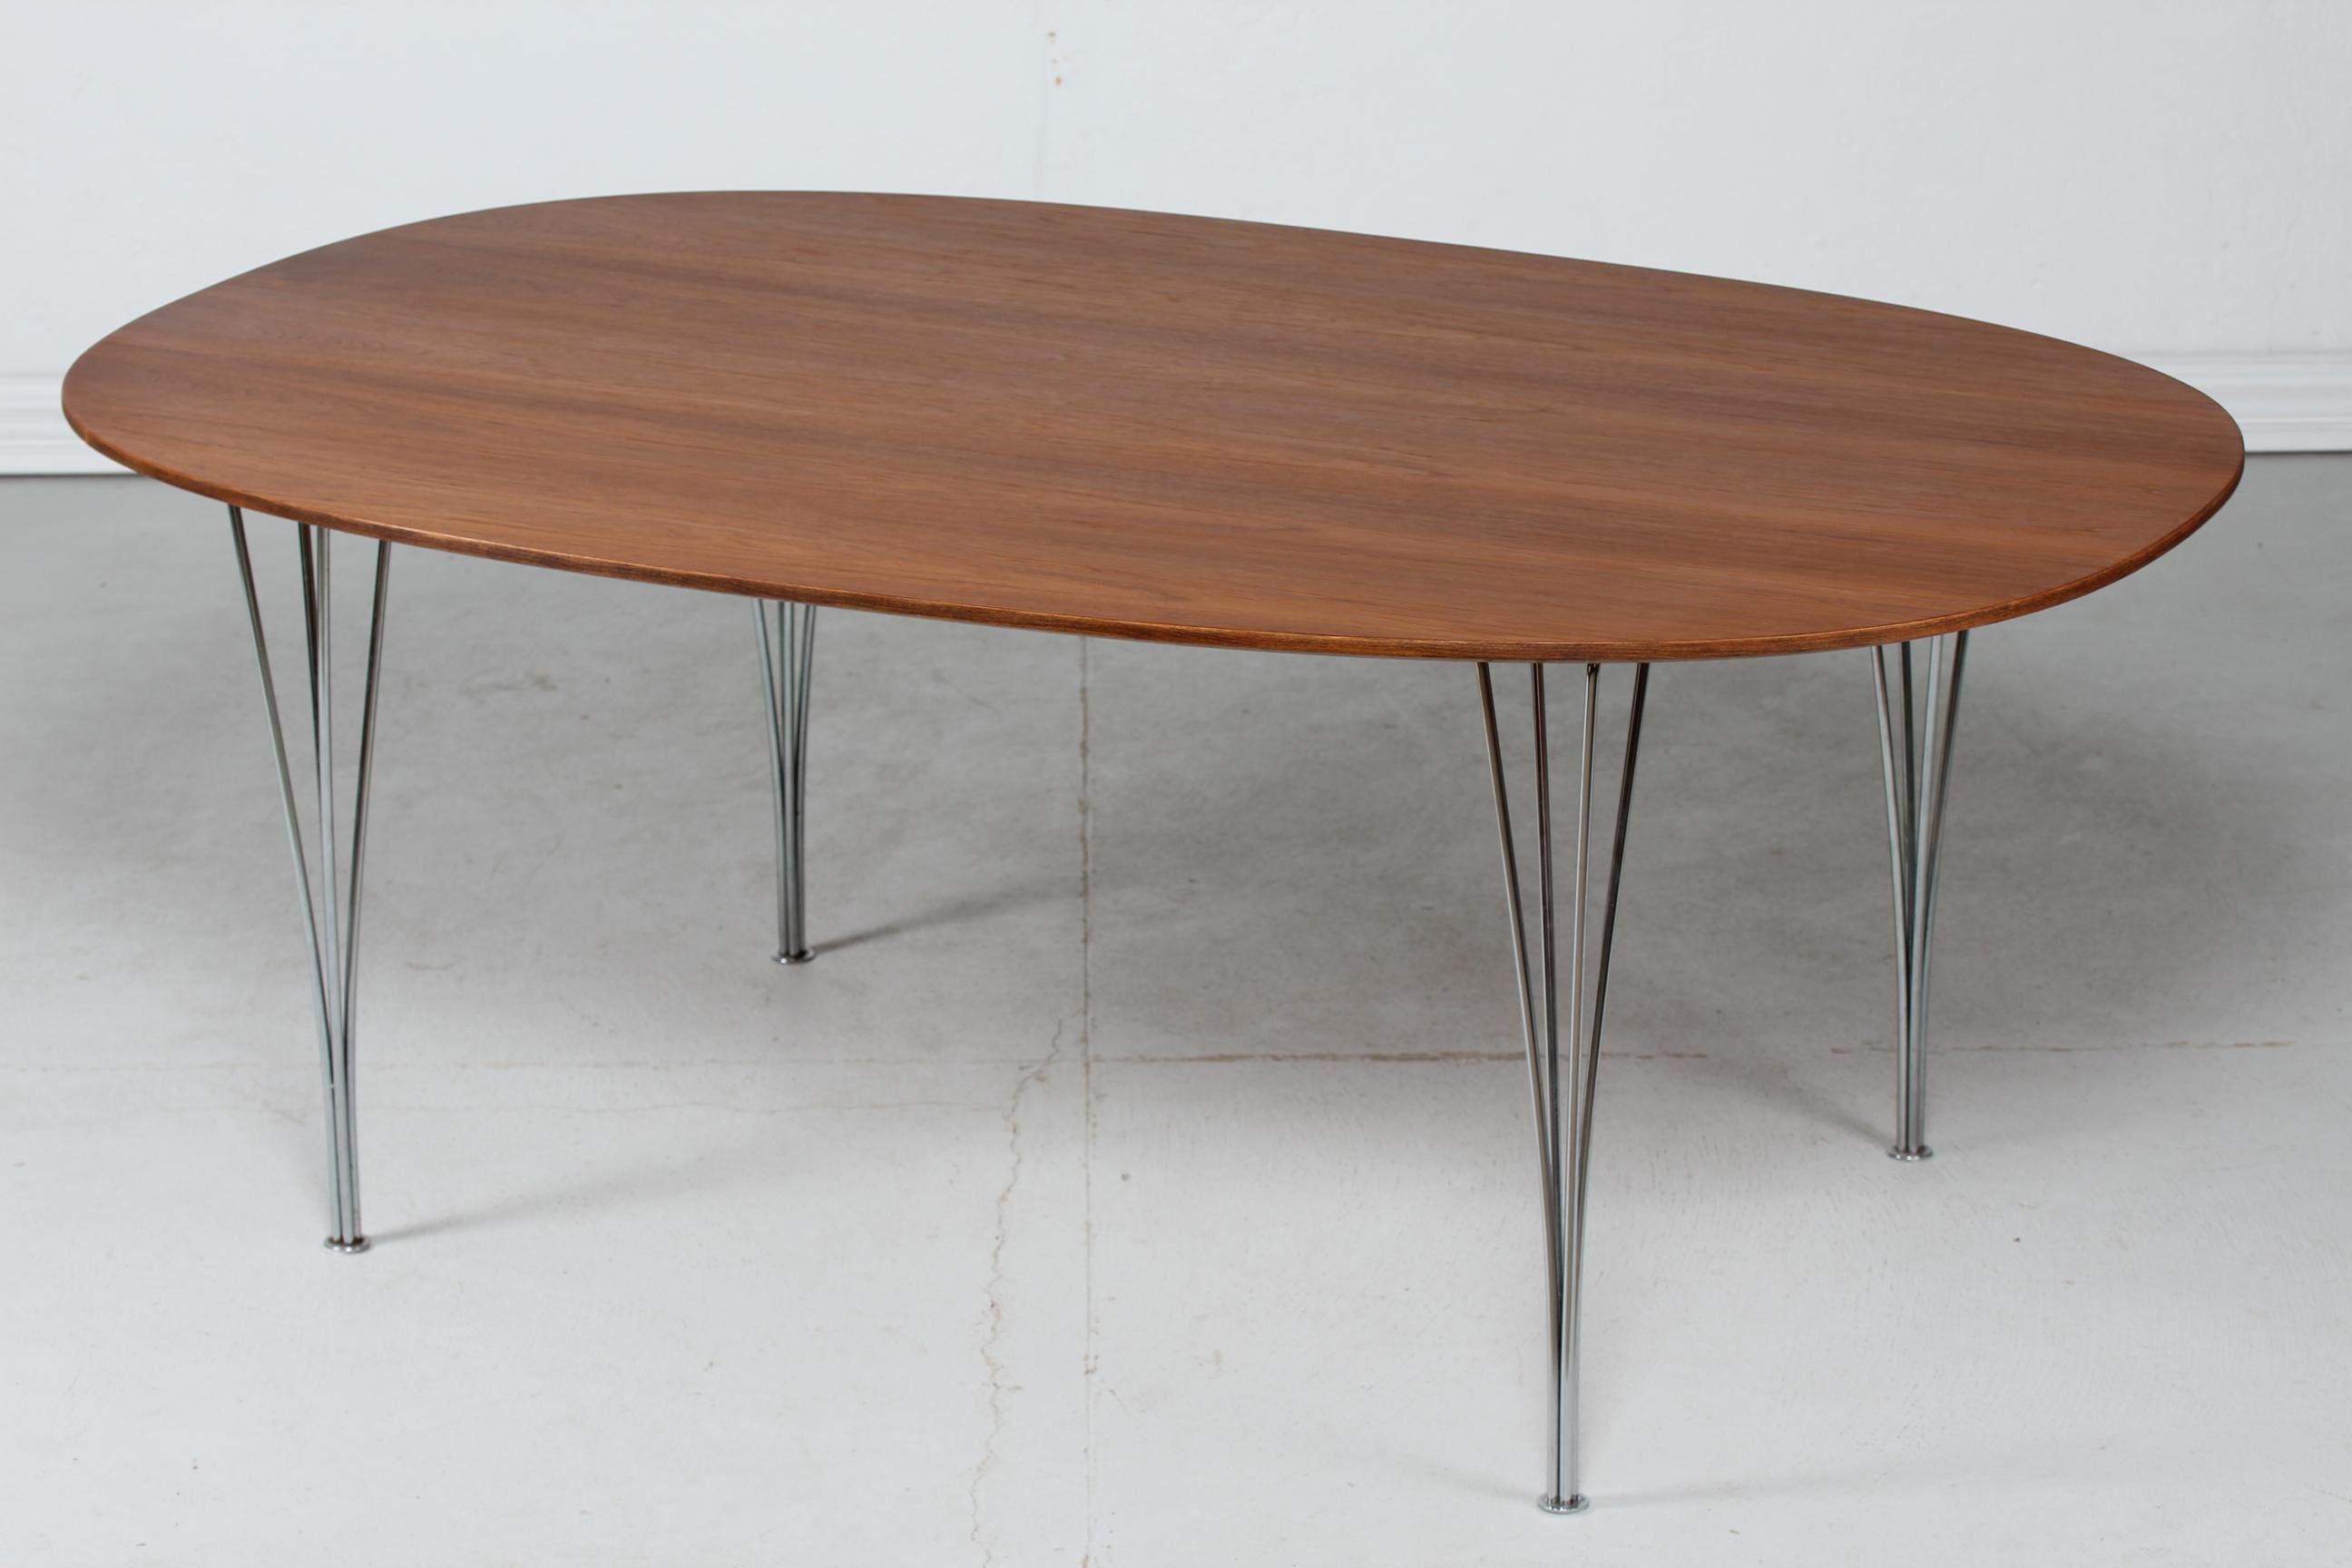 Danish modern large super ellipse table designed by Piet Hein (1905-1996) and Bruno Mathsson
with table top with new oil treated teak veneer.

One of the greatest classics based on Piet Hein's legendary super ellipse shape, which was
created